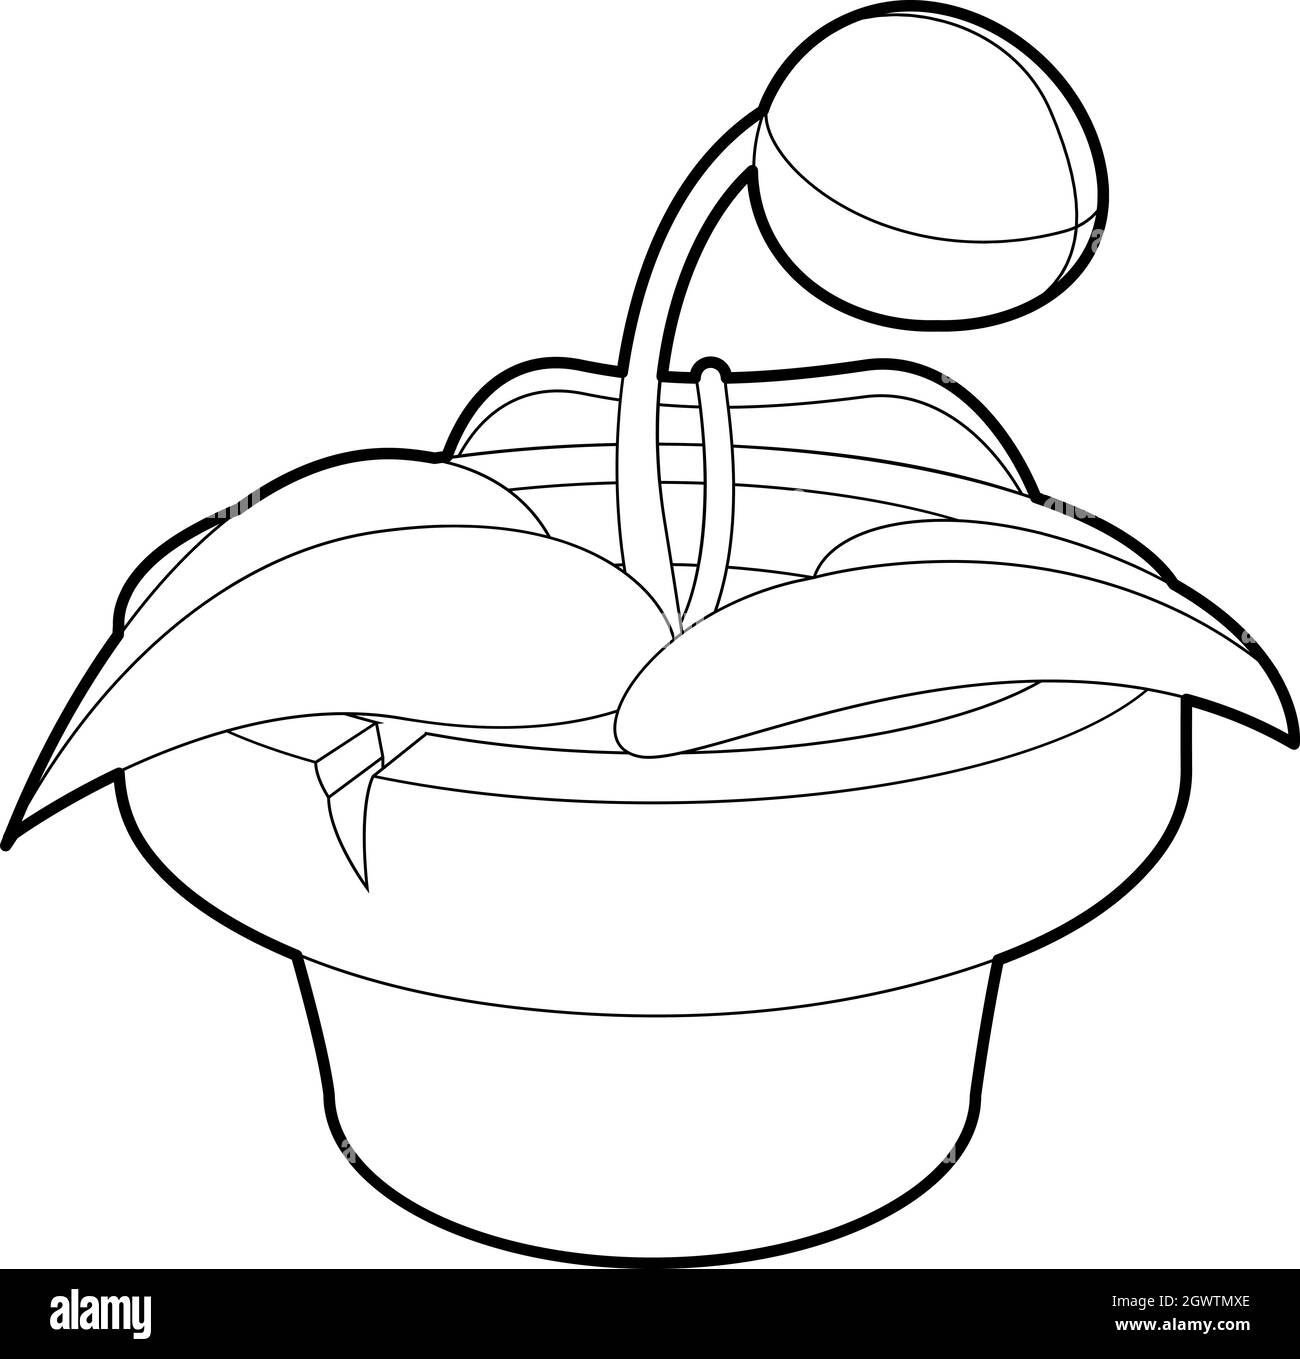 plant-in-pot-icon-outline-style-stock-vector-image-art-alamy